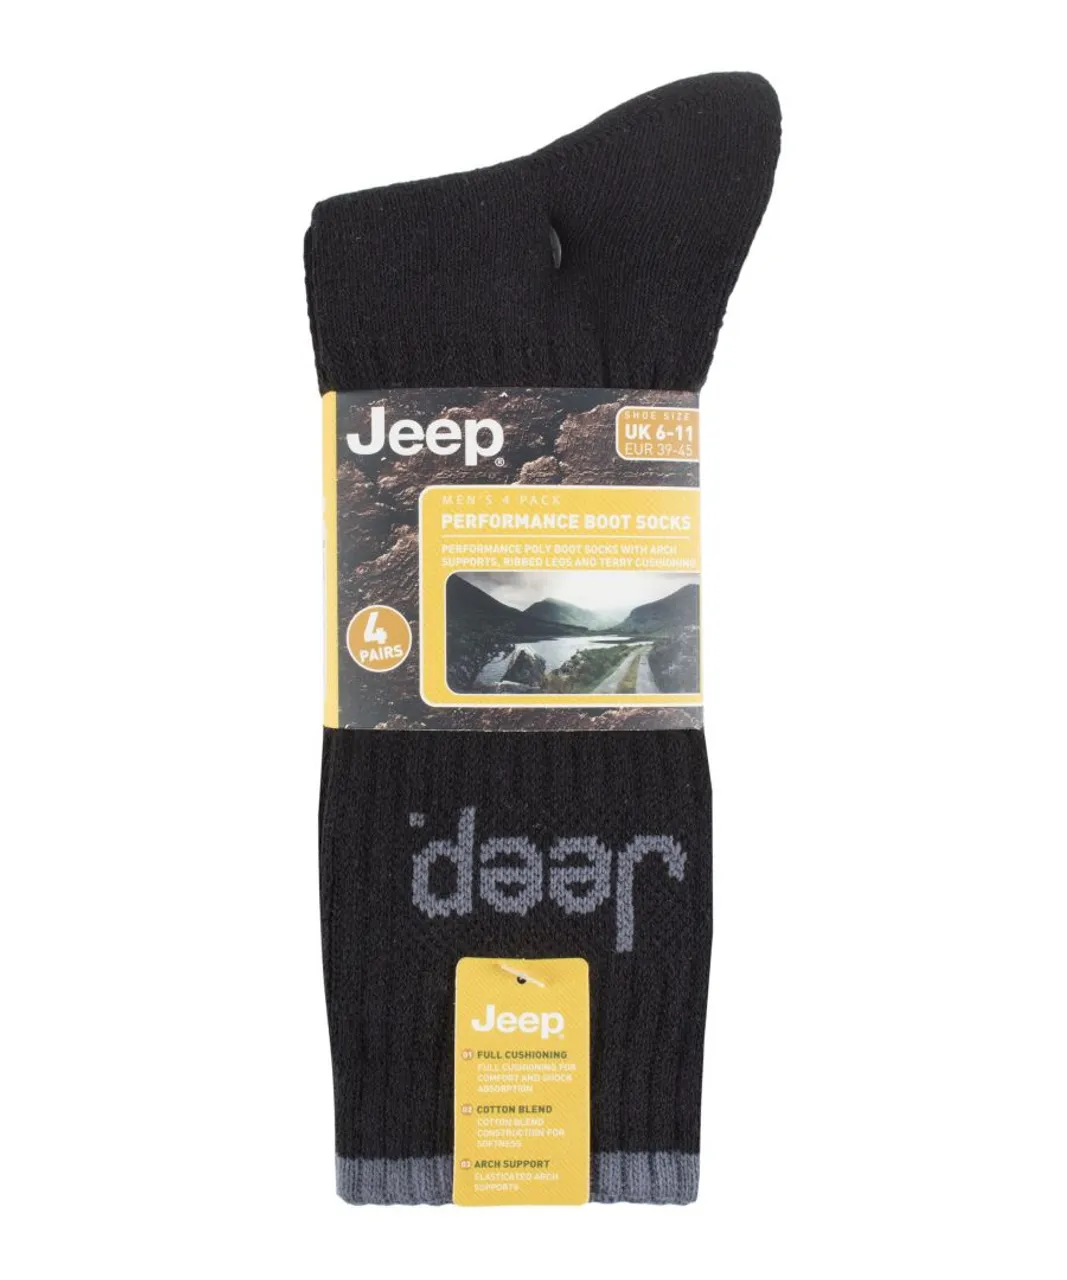 Jeep - 4 Pairs Mens Anti Blister Thick Cushioned Luxury Boot Socks - Black Cotton